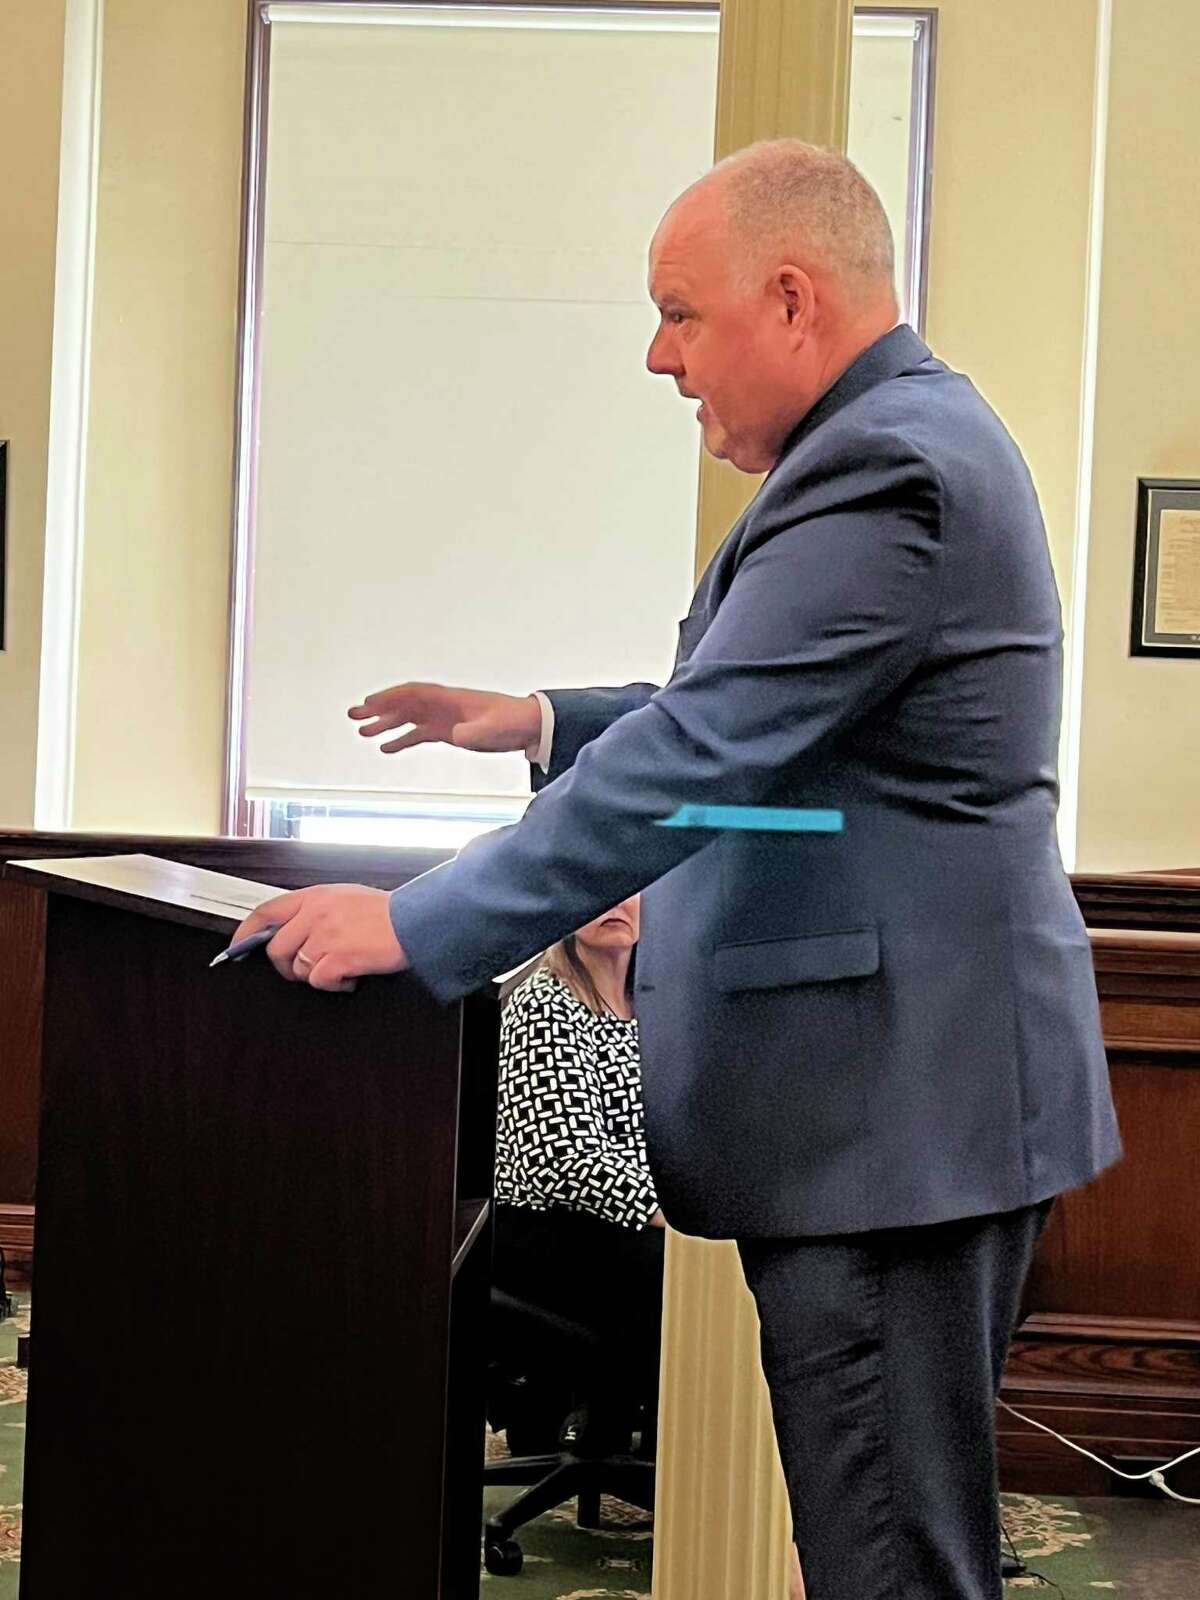 Robert Molloy, attorney for Jahquay Brown, 22, of Cohoes, delivers his closing arguments on Wednesday, June 29, 2022, at Rensselaer County Court in Troy, N.Y. Brown was charged with second-degree murder in the Sept. 13, 2020 drive-by shooting of 11-year-old Ayshawn Davis on Old Sixth Avenue.